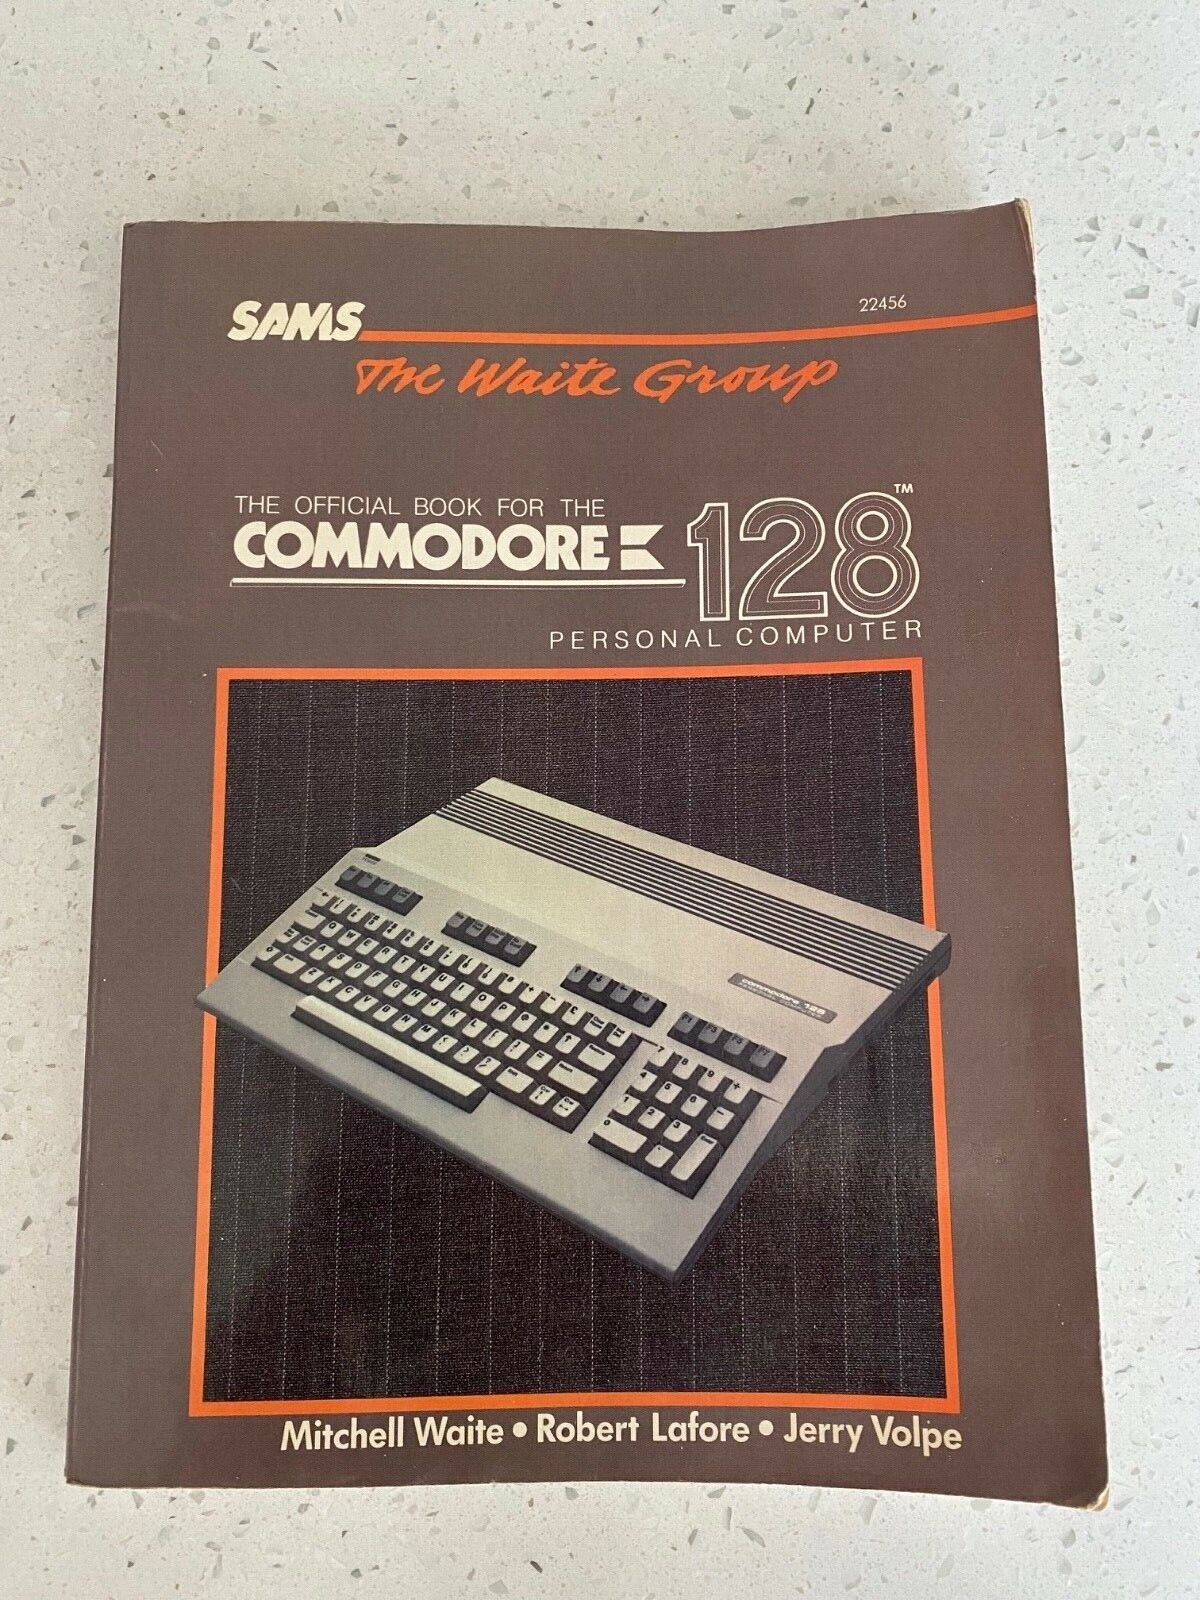 OFFICIAL BOOK OF COMMODORE 128 SAMS WAITE GROUP VINTAGE COMPUTER BOOK 